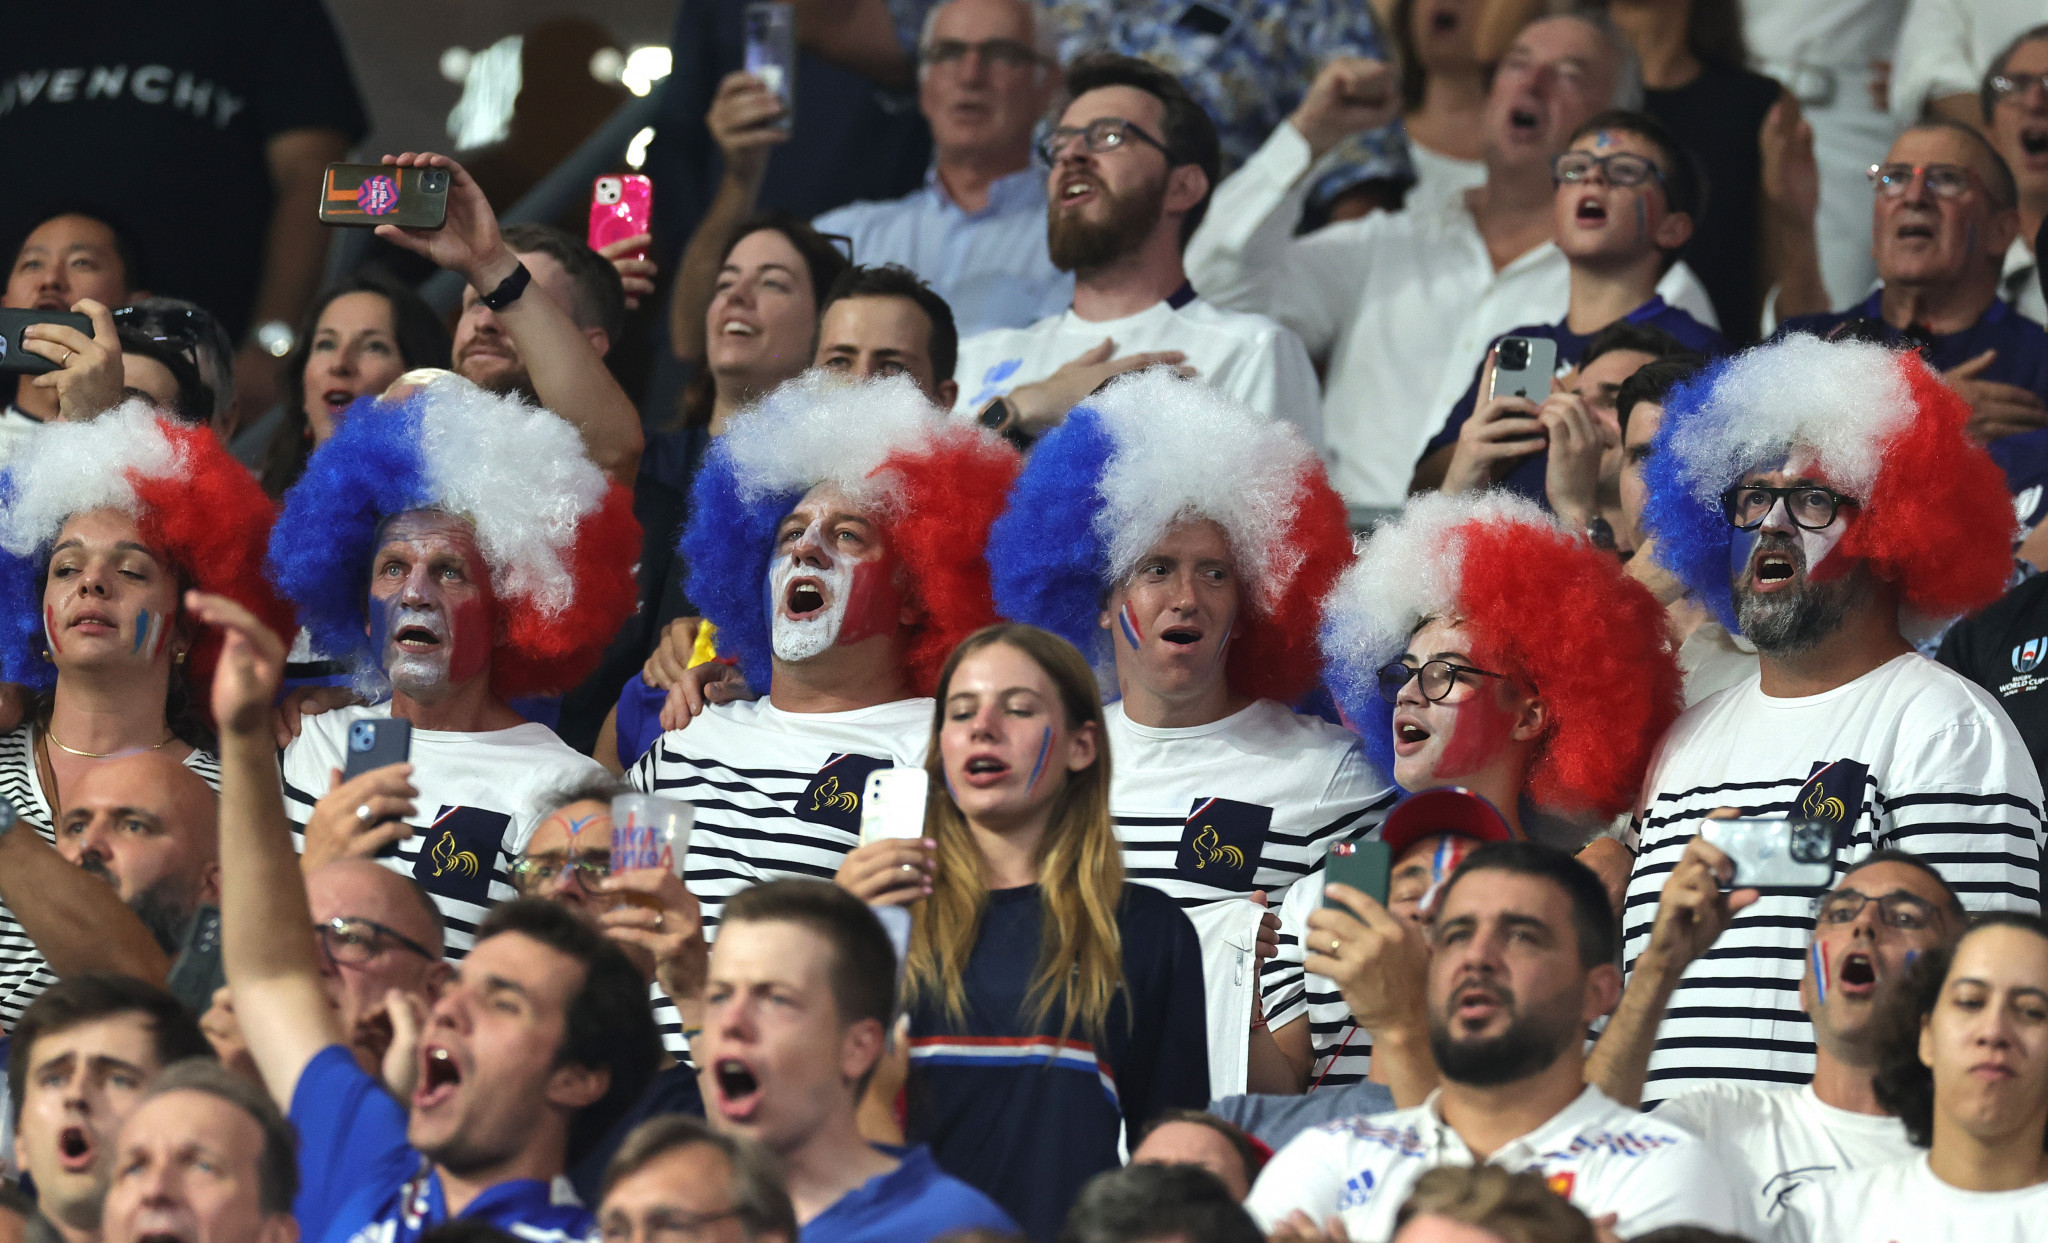 Rugby World Cup organisers considering anthem changes after choir criticism